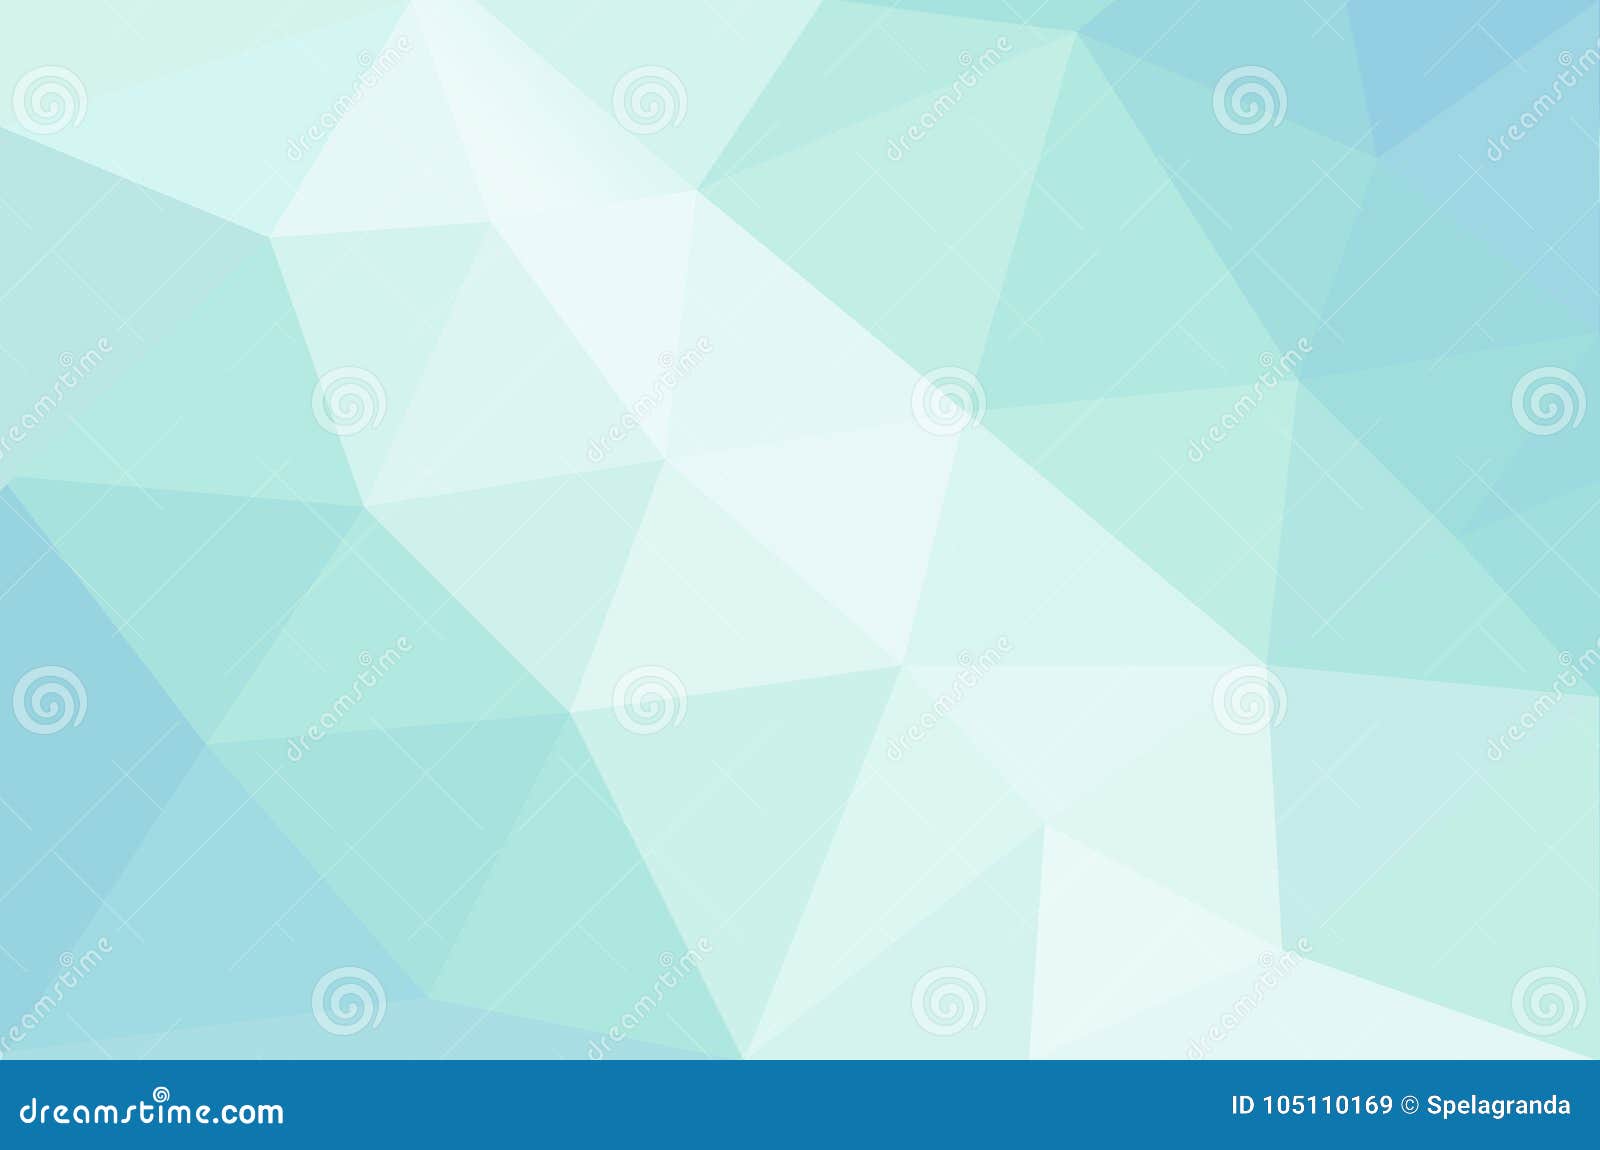 abstract calming pastel colored background